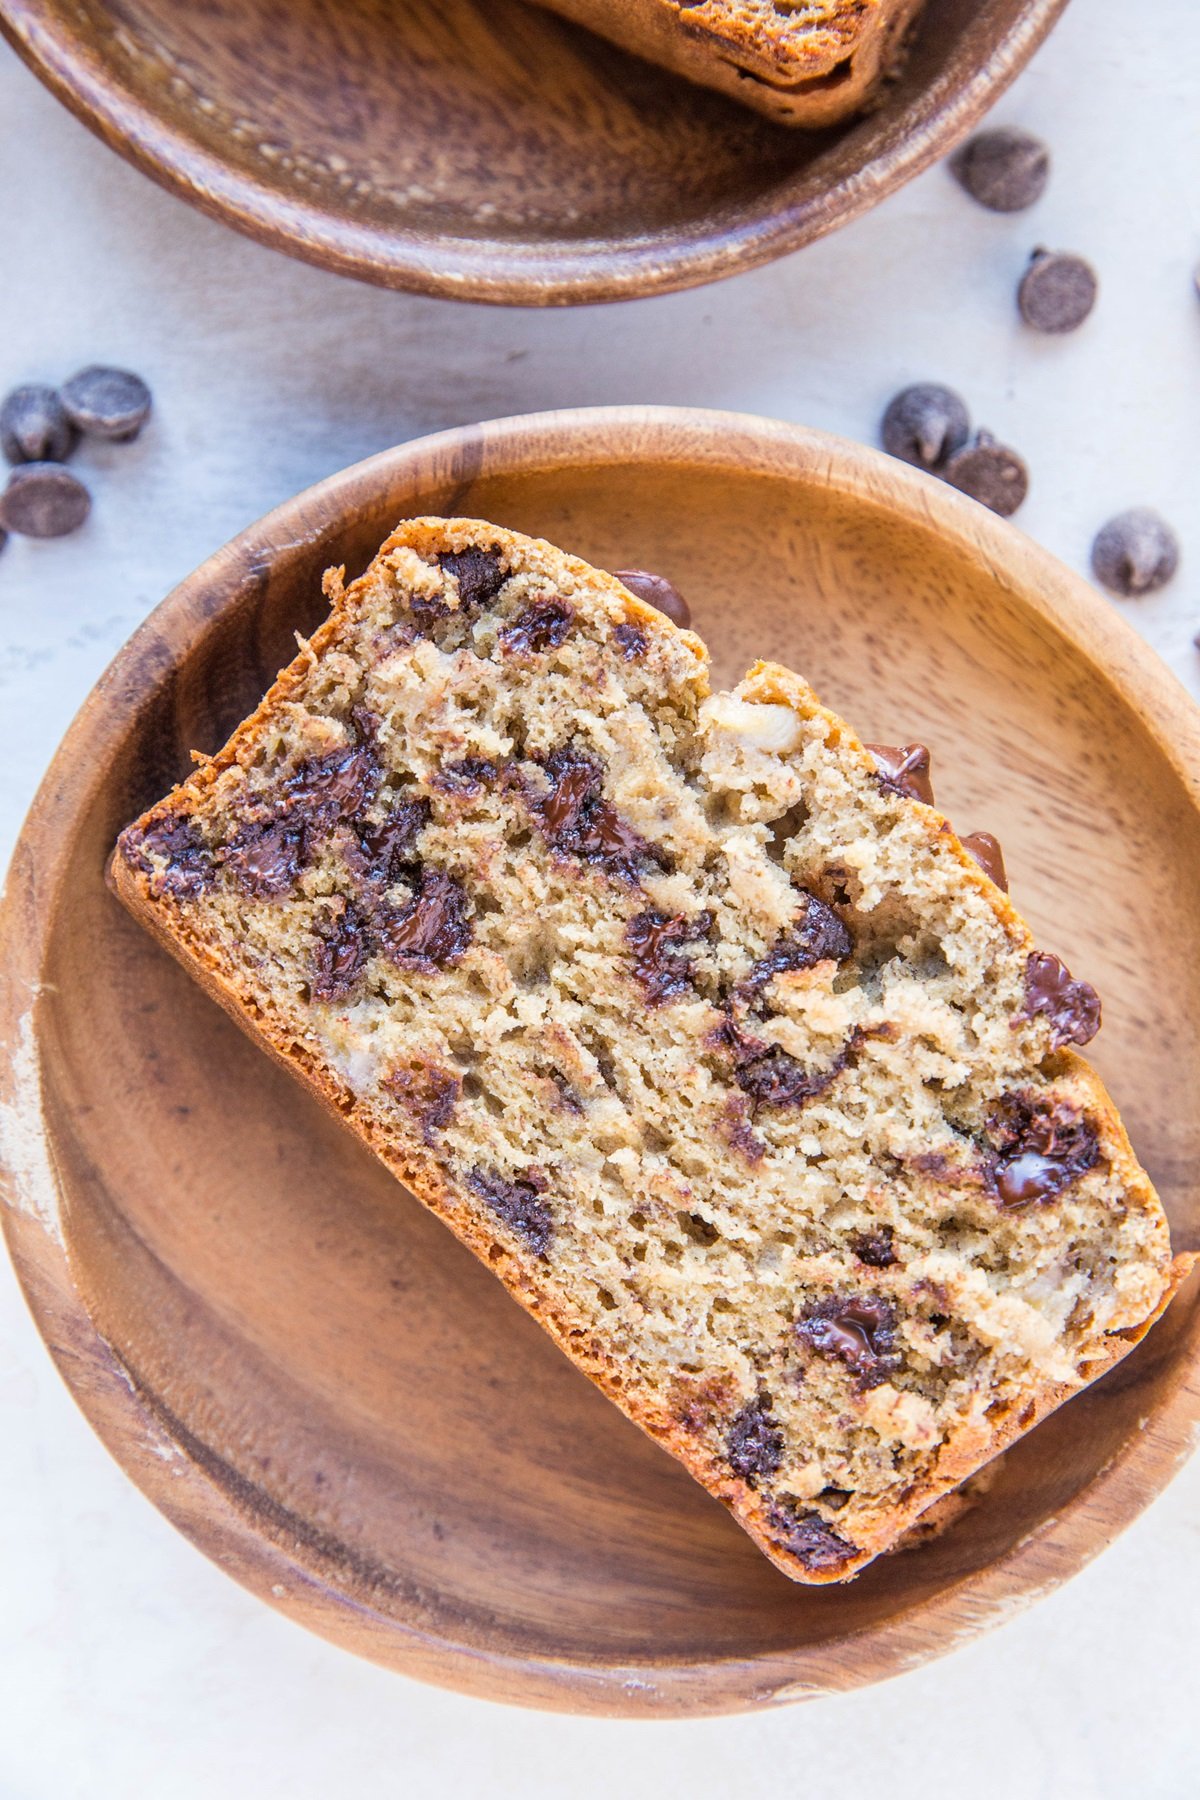 Gluten-Free Banana Bread sweetened mostly with bananas and a touch of coconut sugar for a healthier banana bread recipe